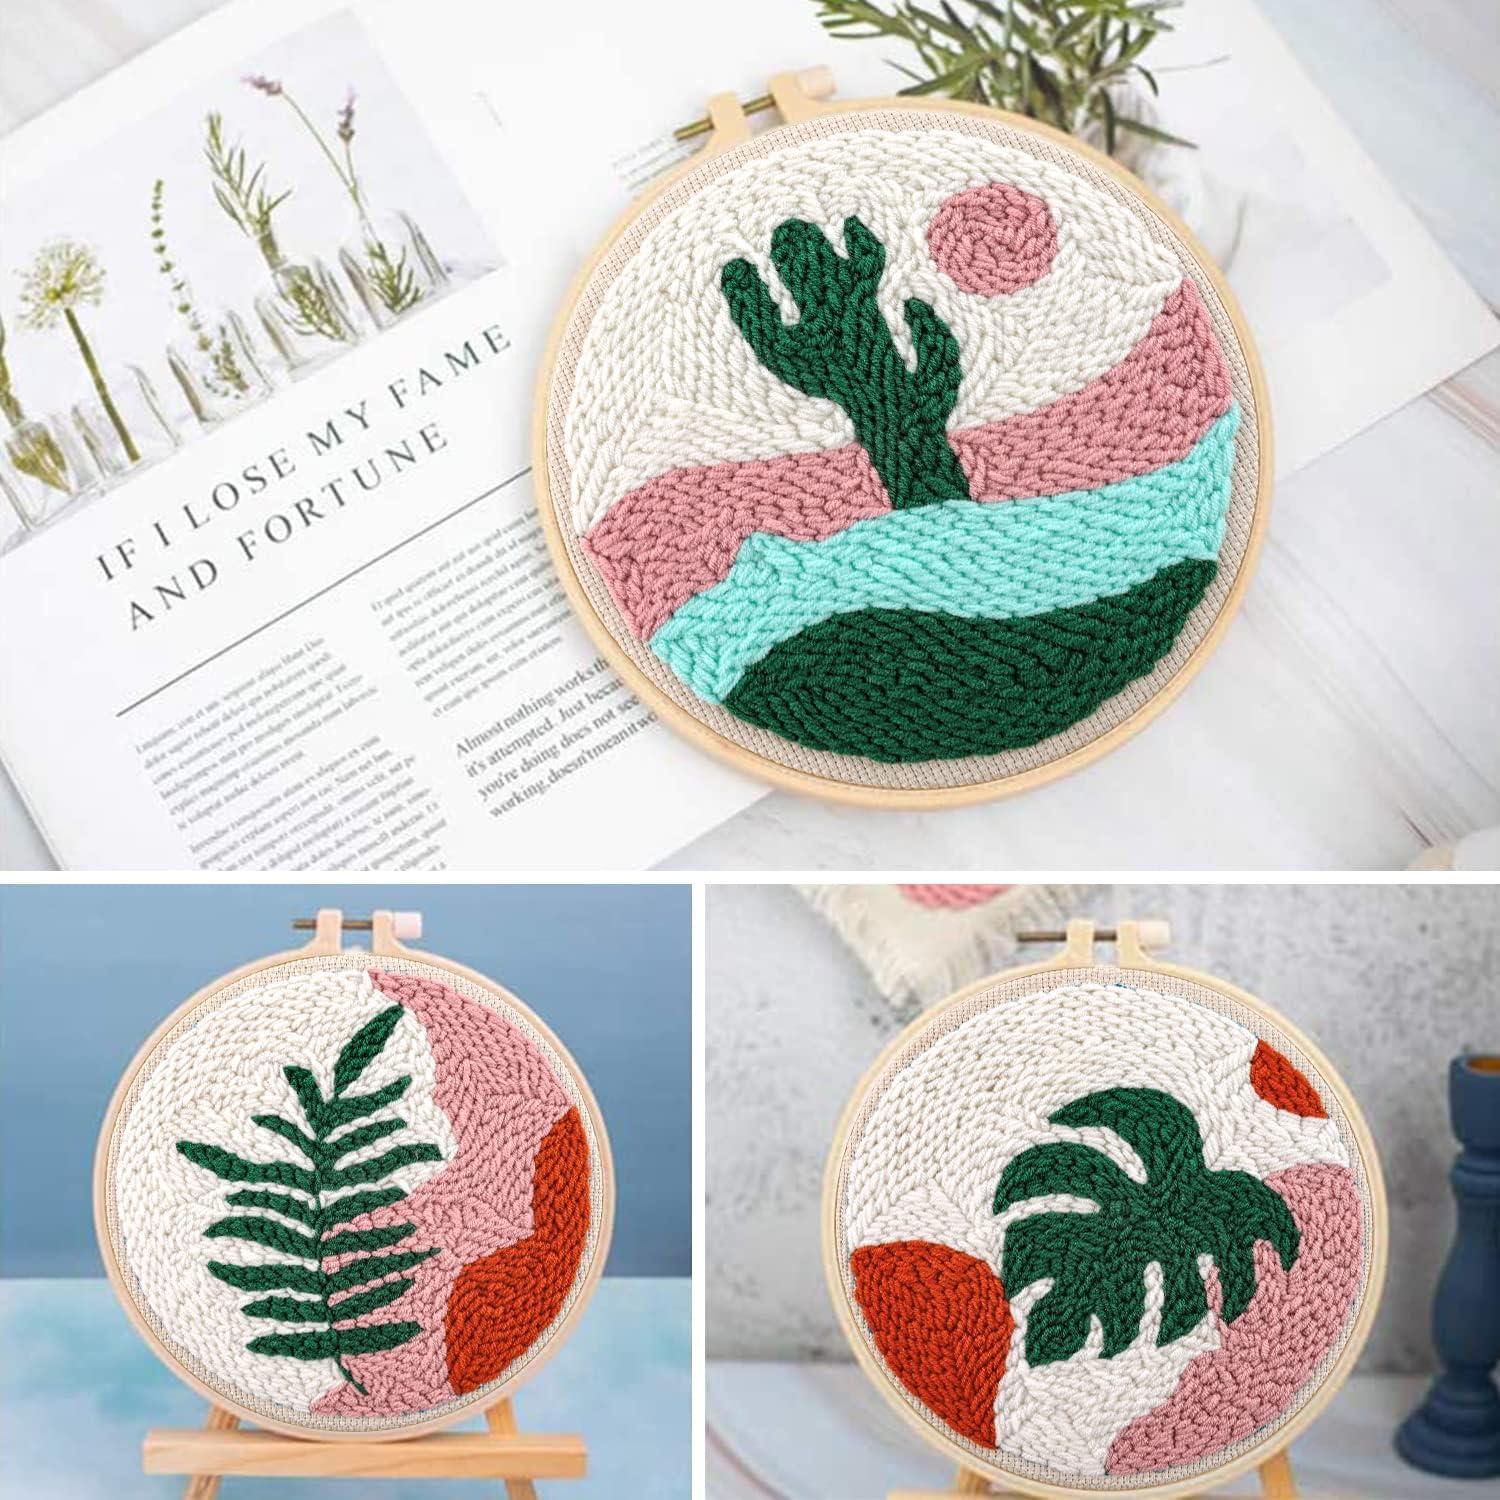 Botanical Trio Punch Needle Kit: Patterns and Supplies